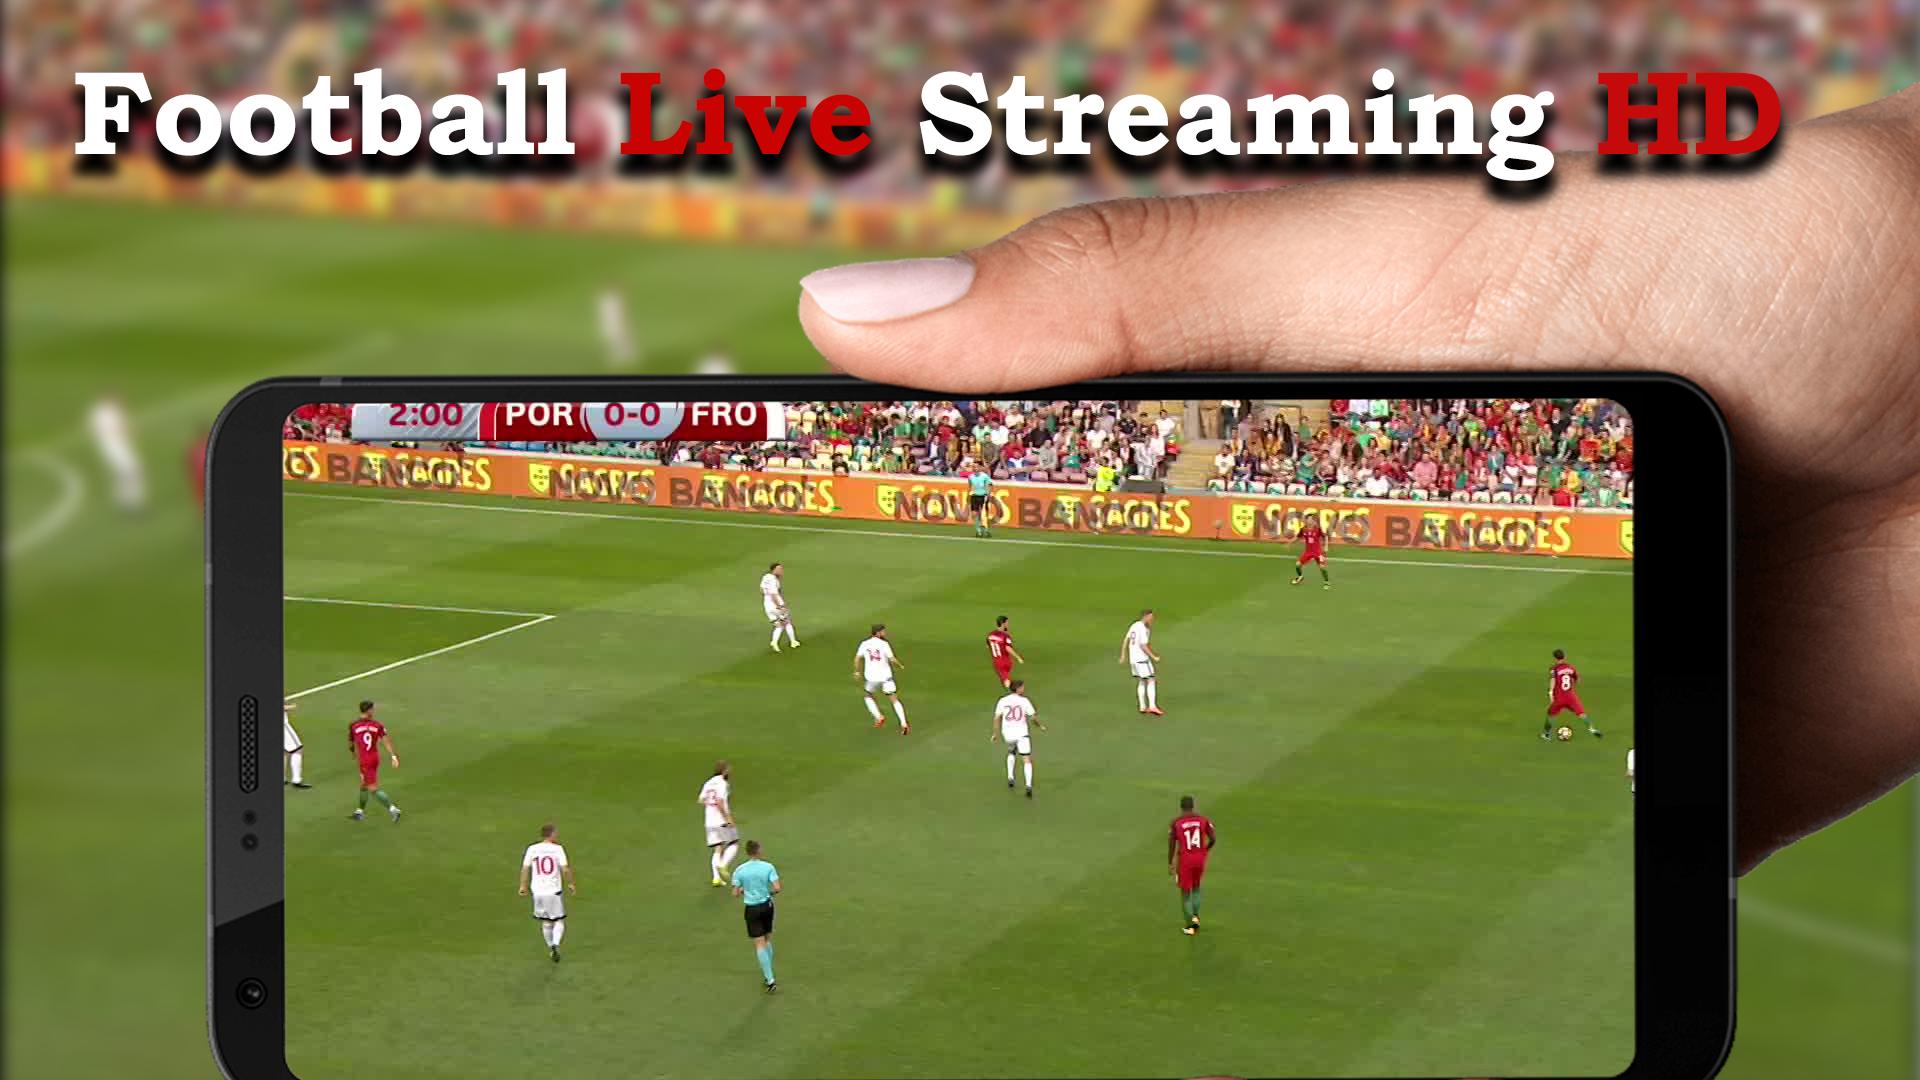 Football live streaming sites